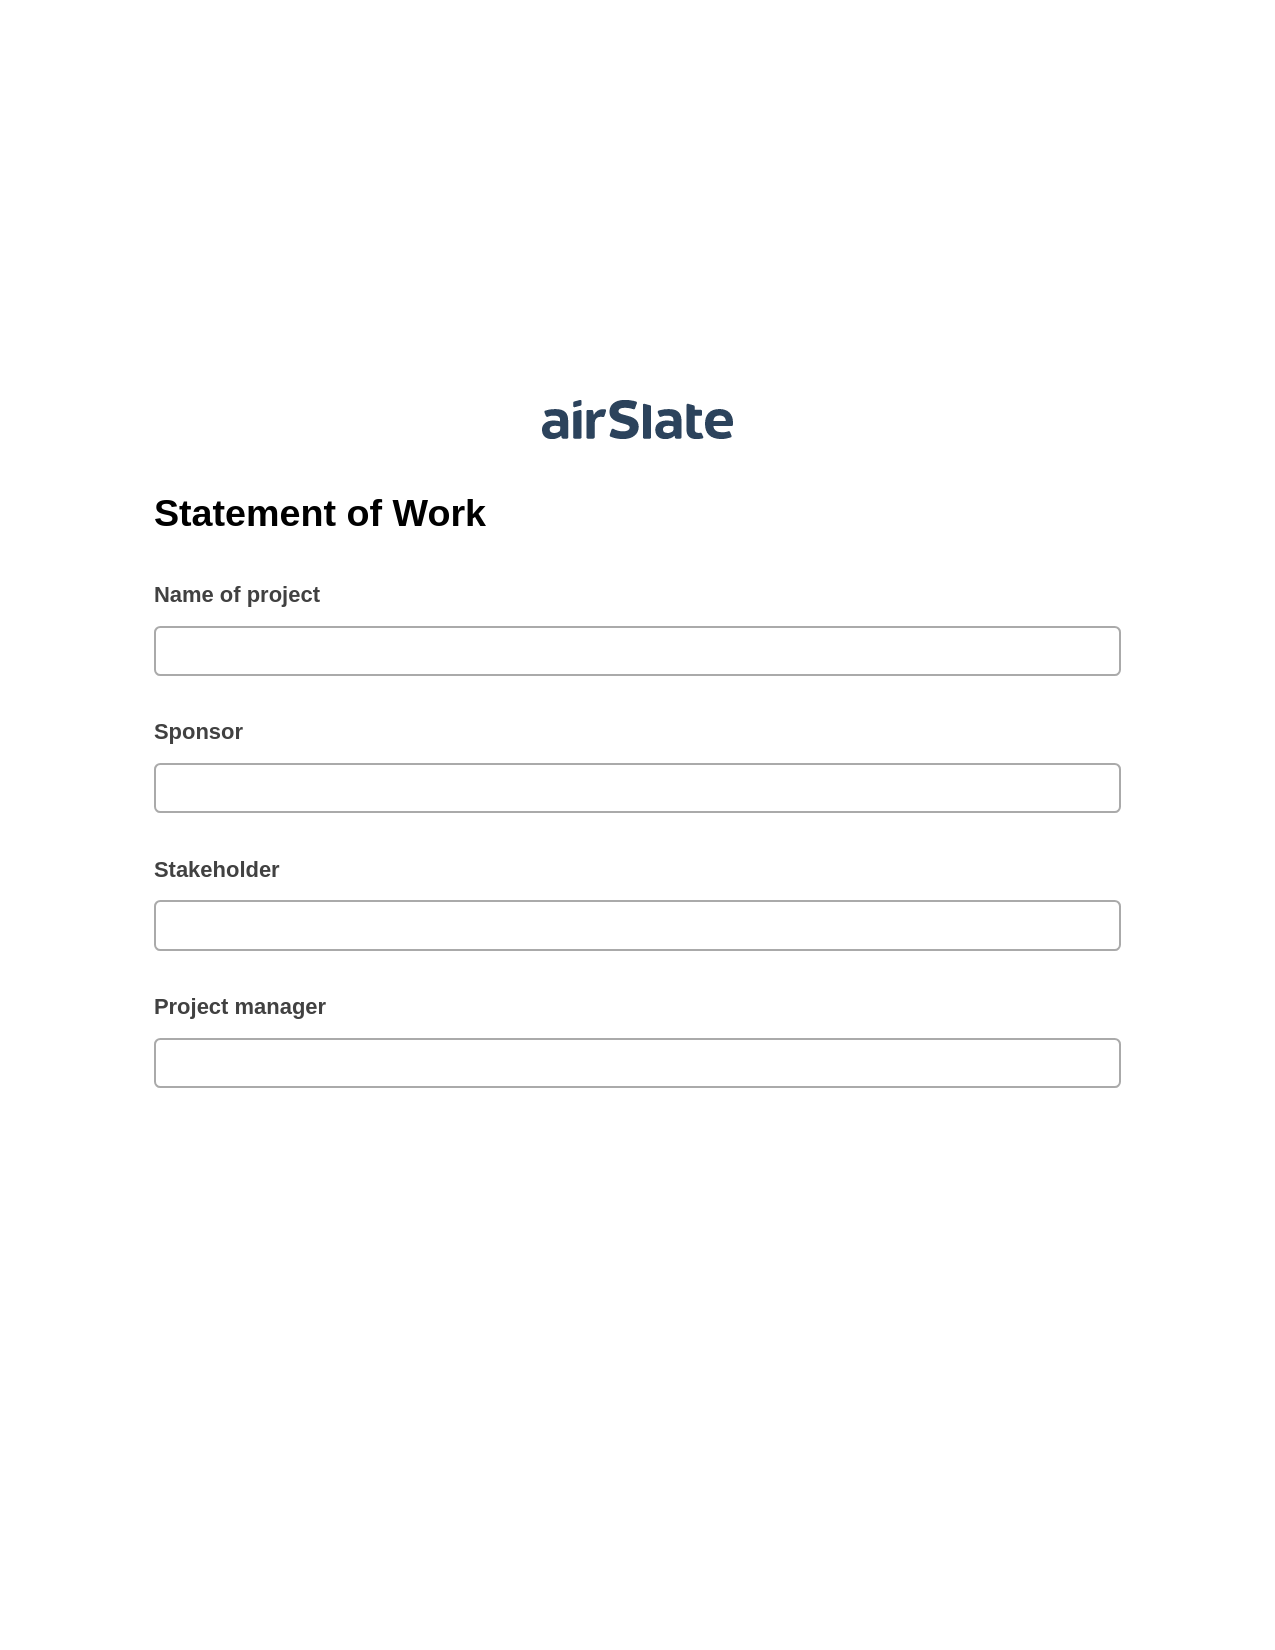 Statement of Work Pre-fill from Google Sheet Dropdown Options Bot, Remove Tags From Slate Bot, Google Drive Bot